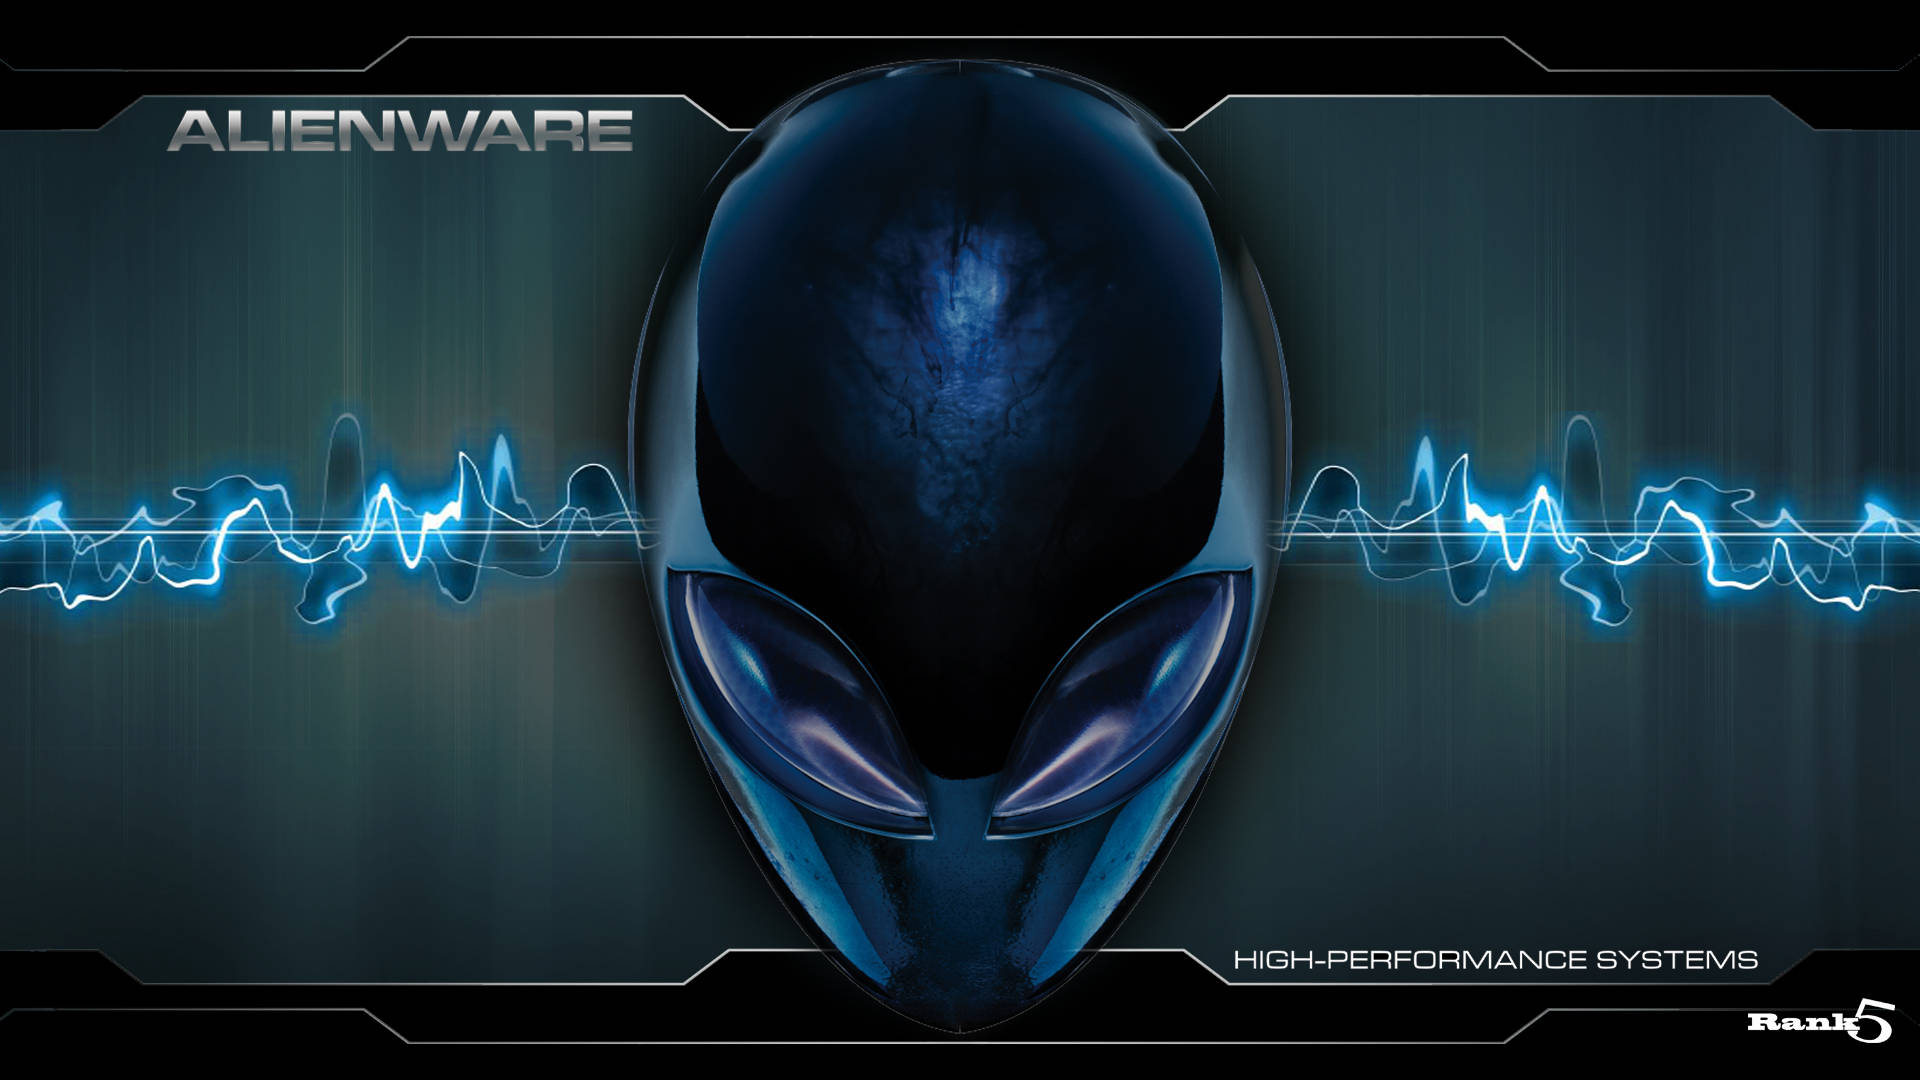 White Alienware High Performance System Wallpaper